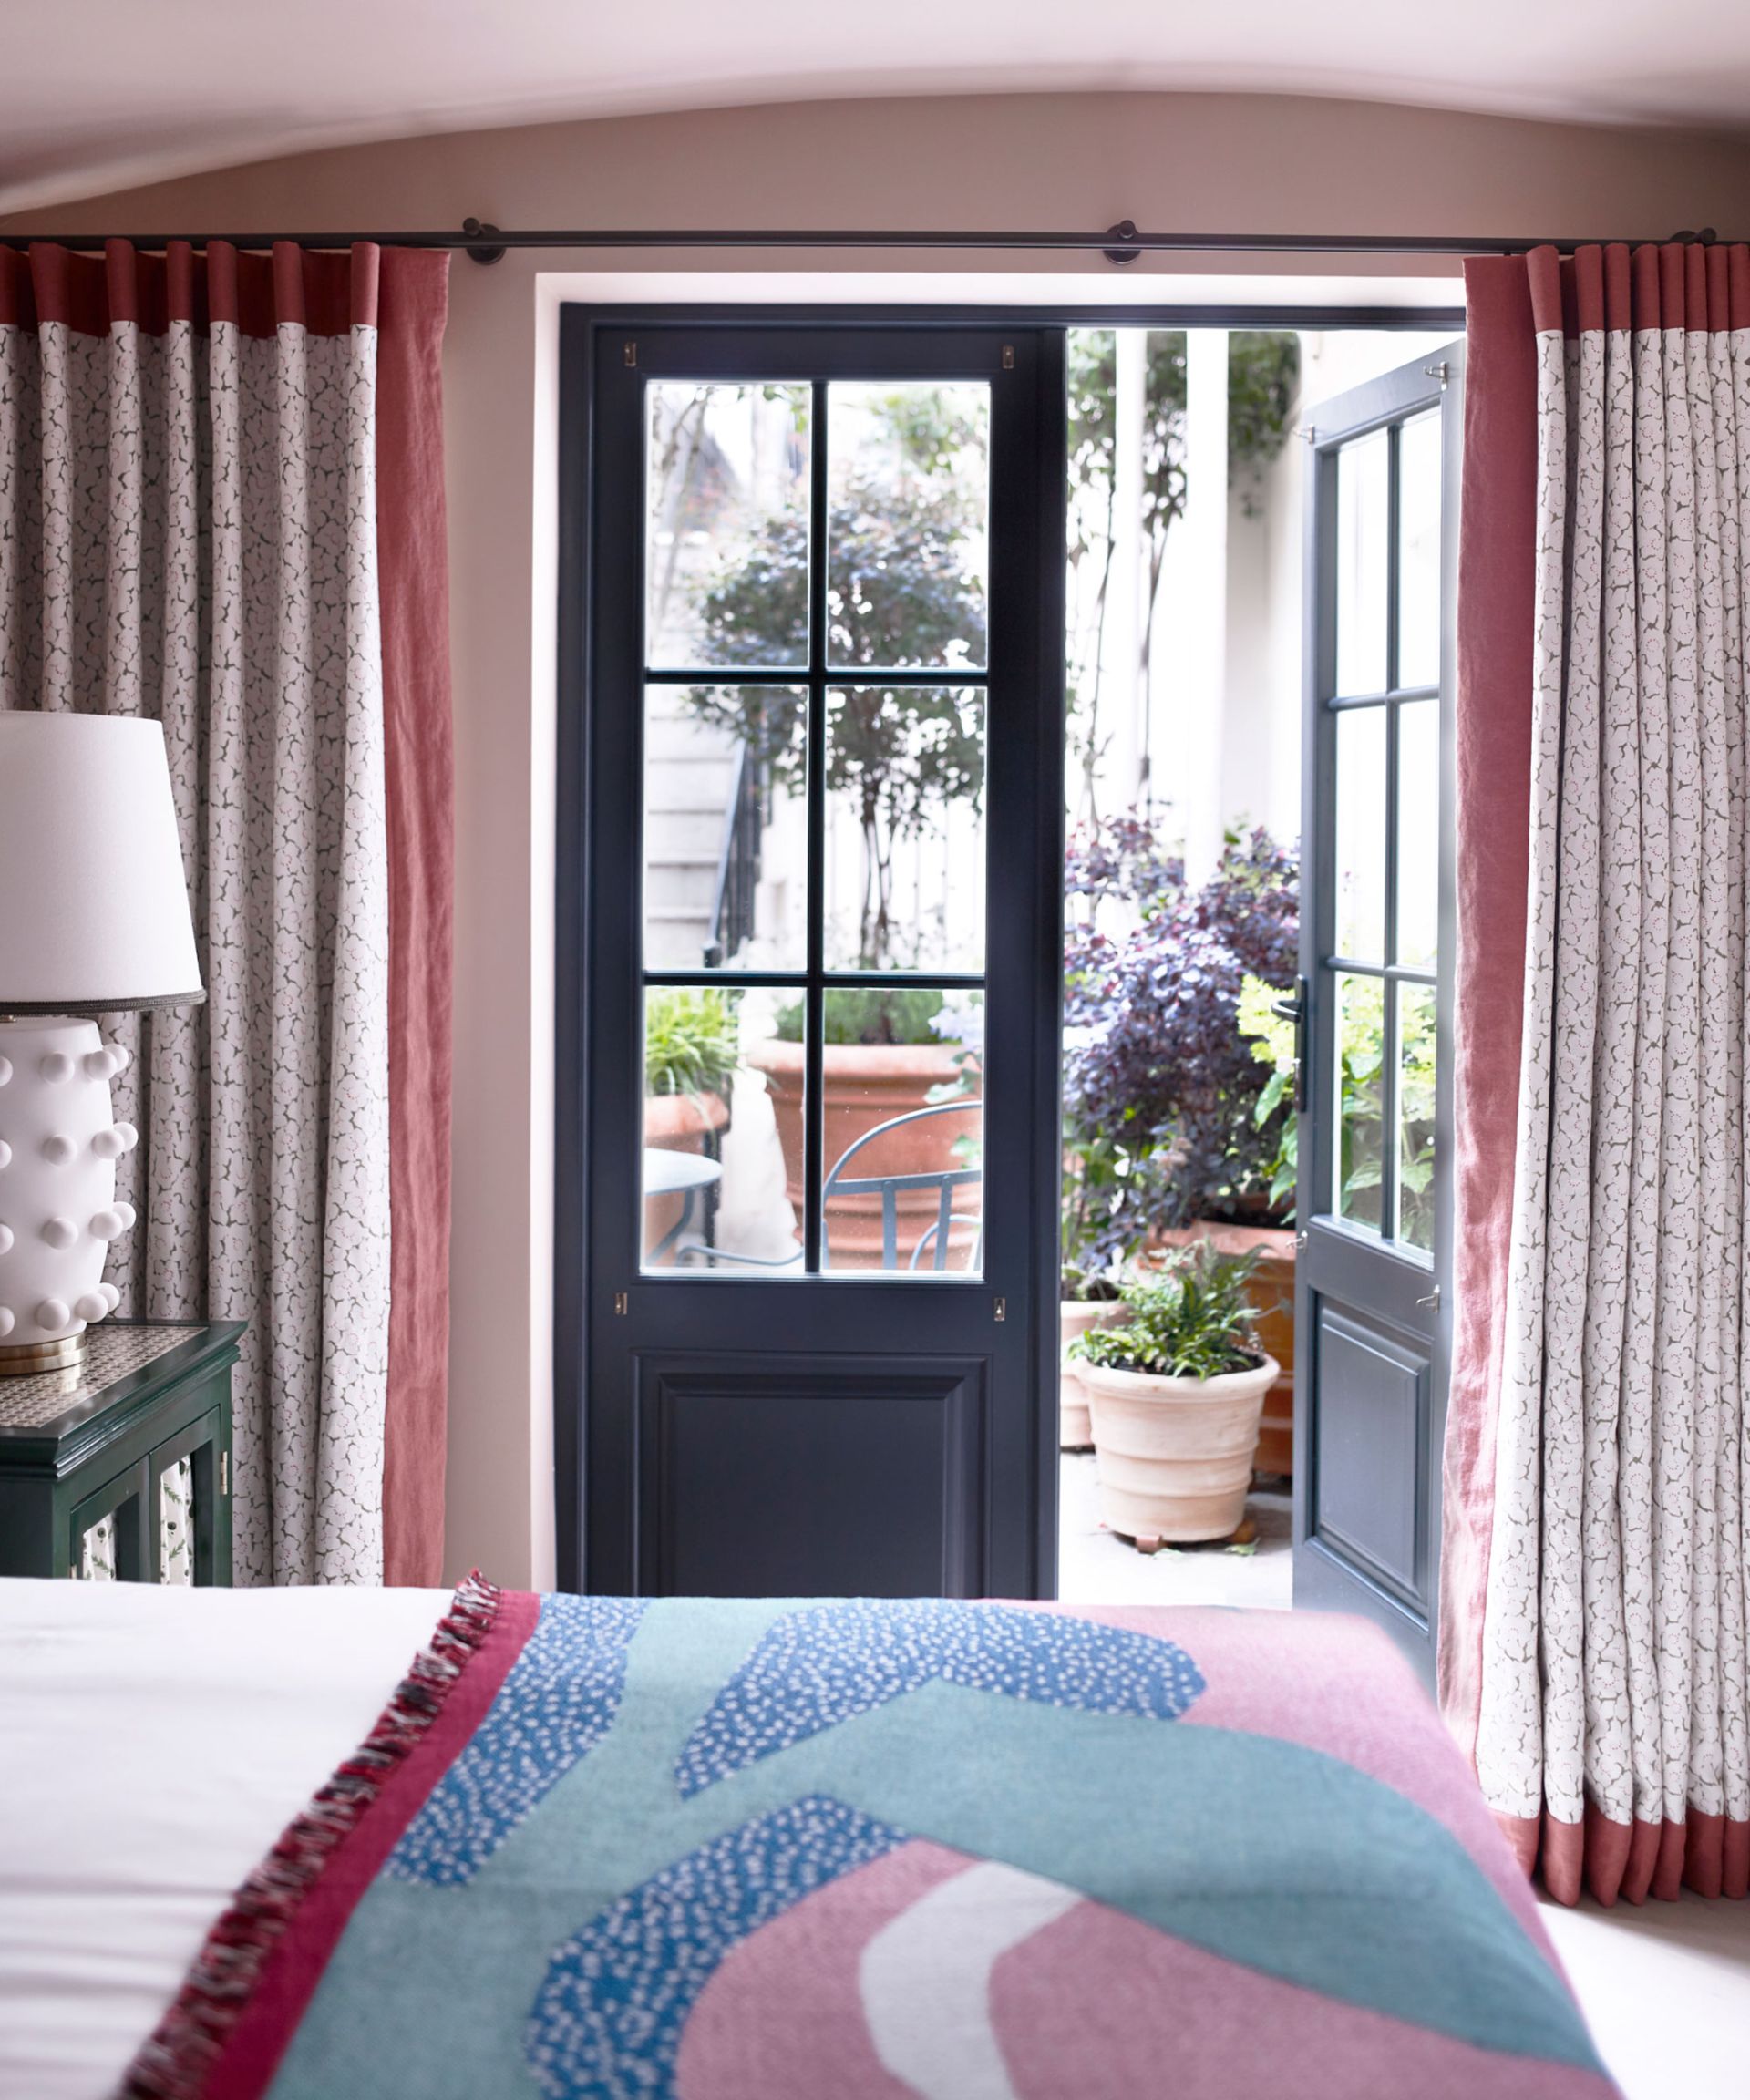 Window treatment ideas – 29 ways with curtains, blinds and shutters for ...